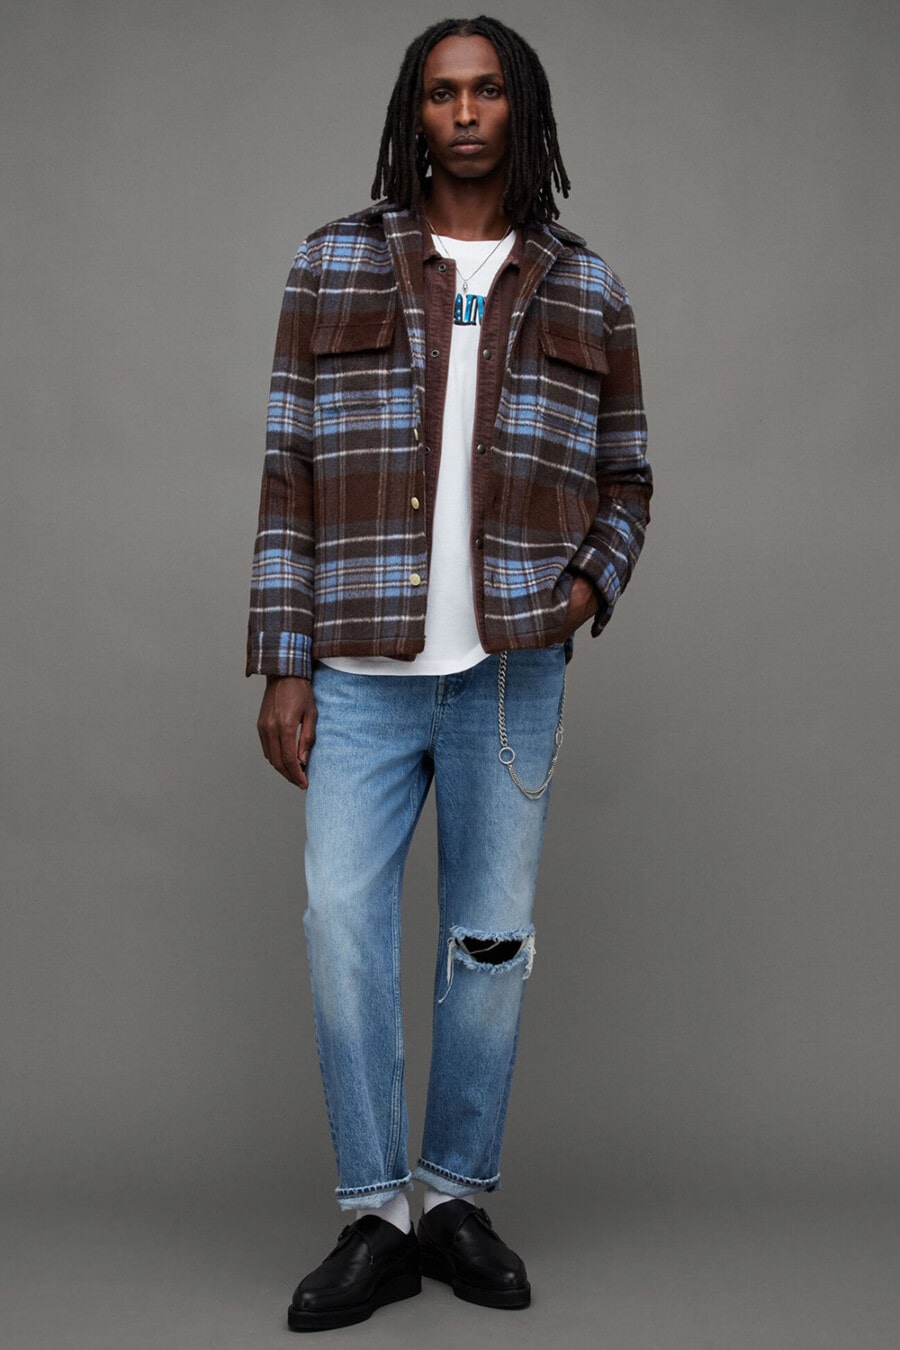 Men's ripped light wash jeans, white logo T-shirt, brown/blue checked overshirt, white socks, wallet chain and black monk-strap shoes grunge outfit